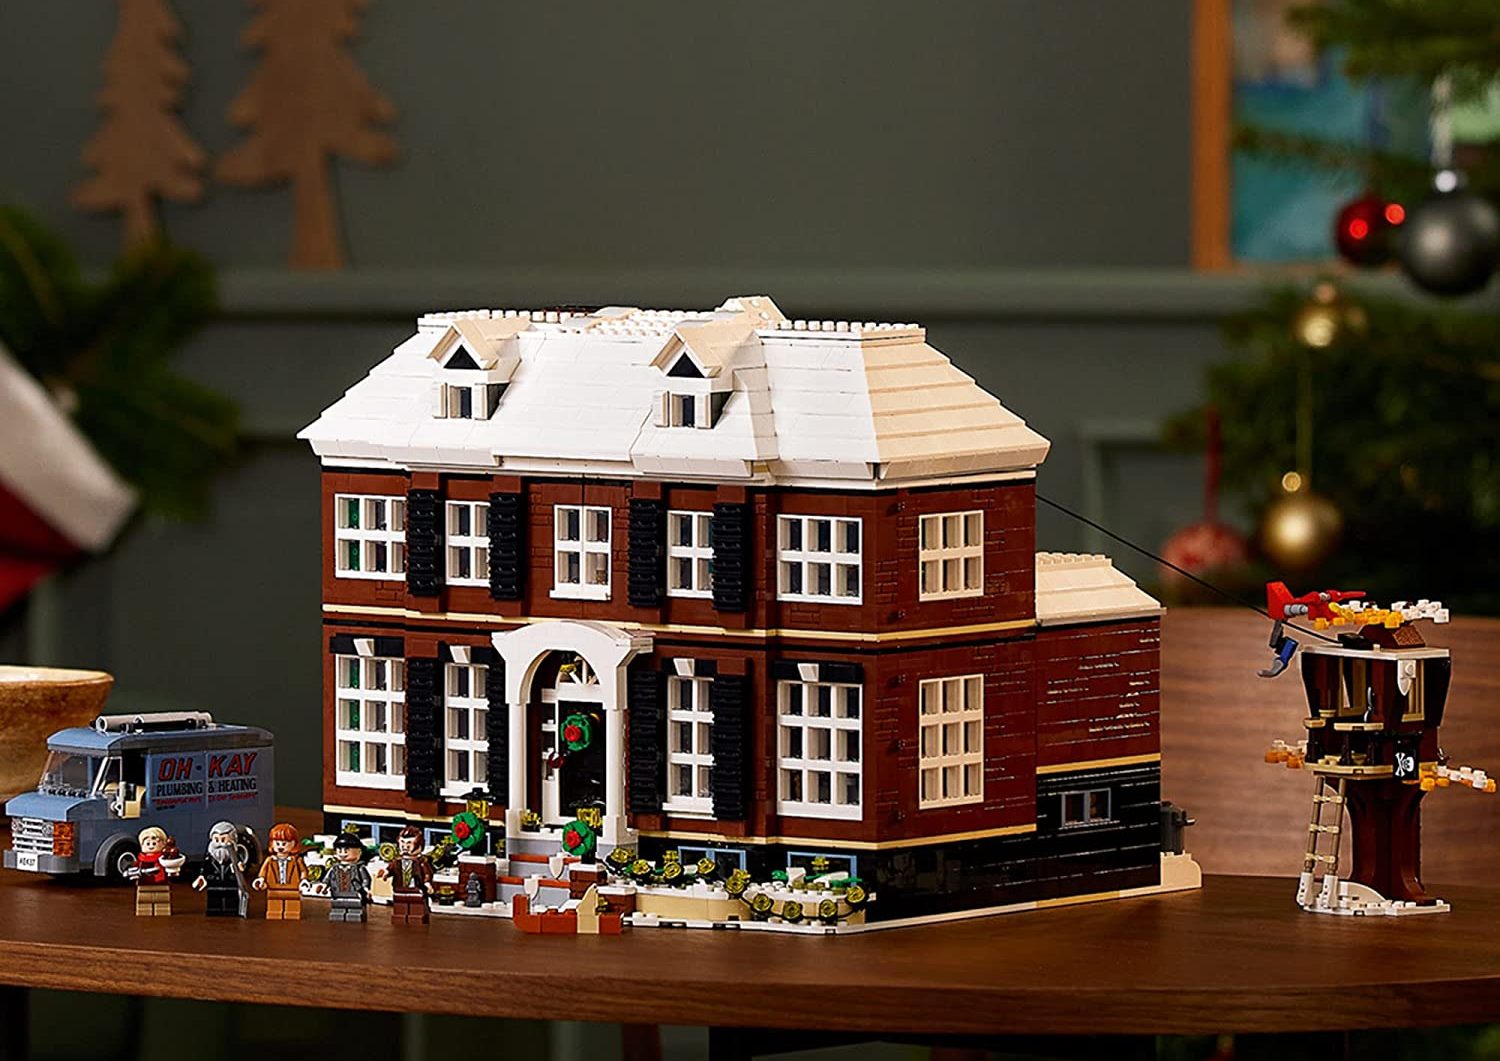 Home Alone Lego House - front